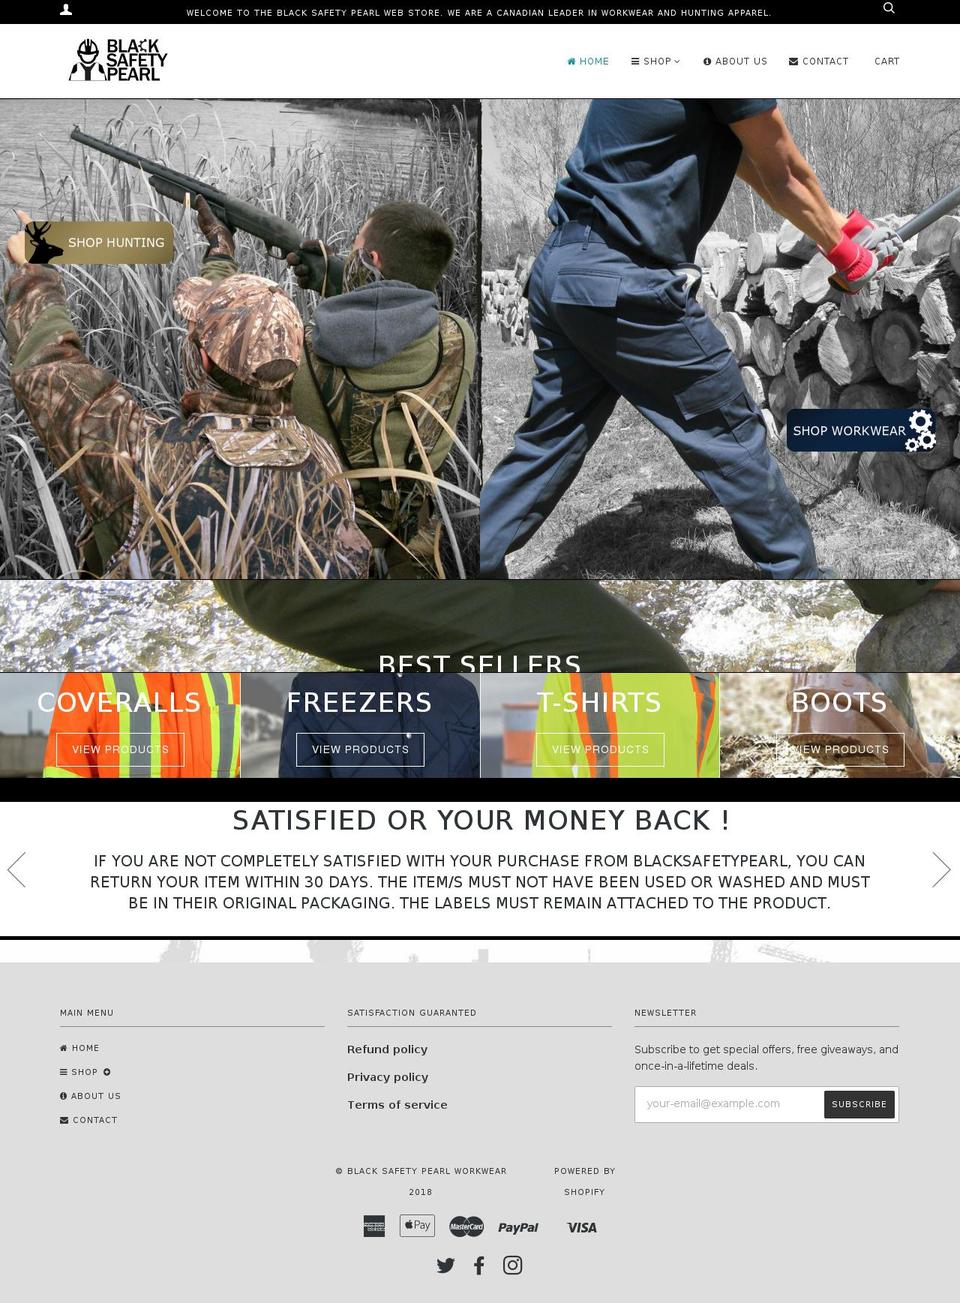 Blacksafetypearl - Pipeline Shopify theme site example big-bill.com